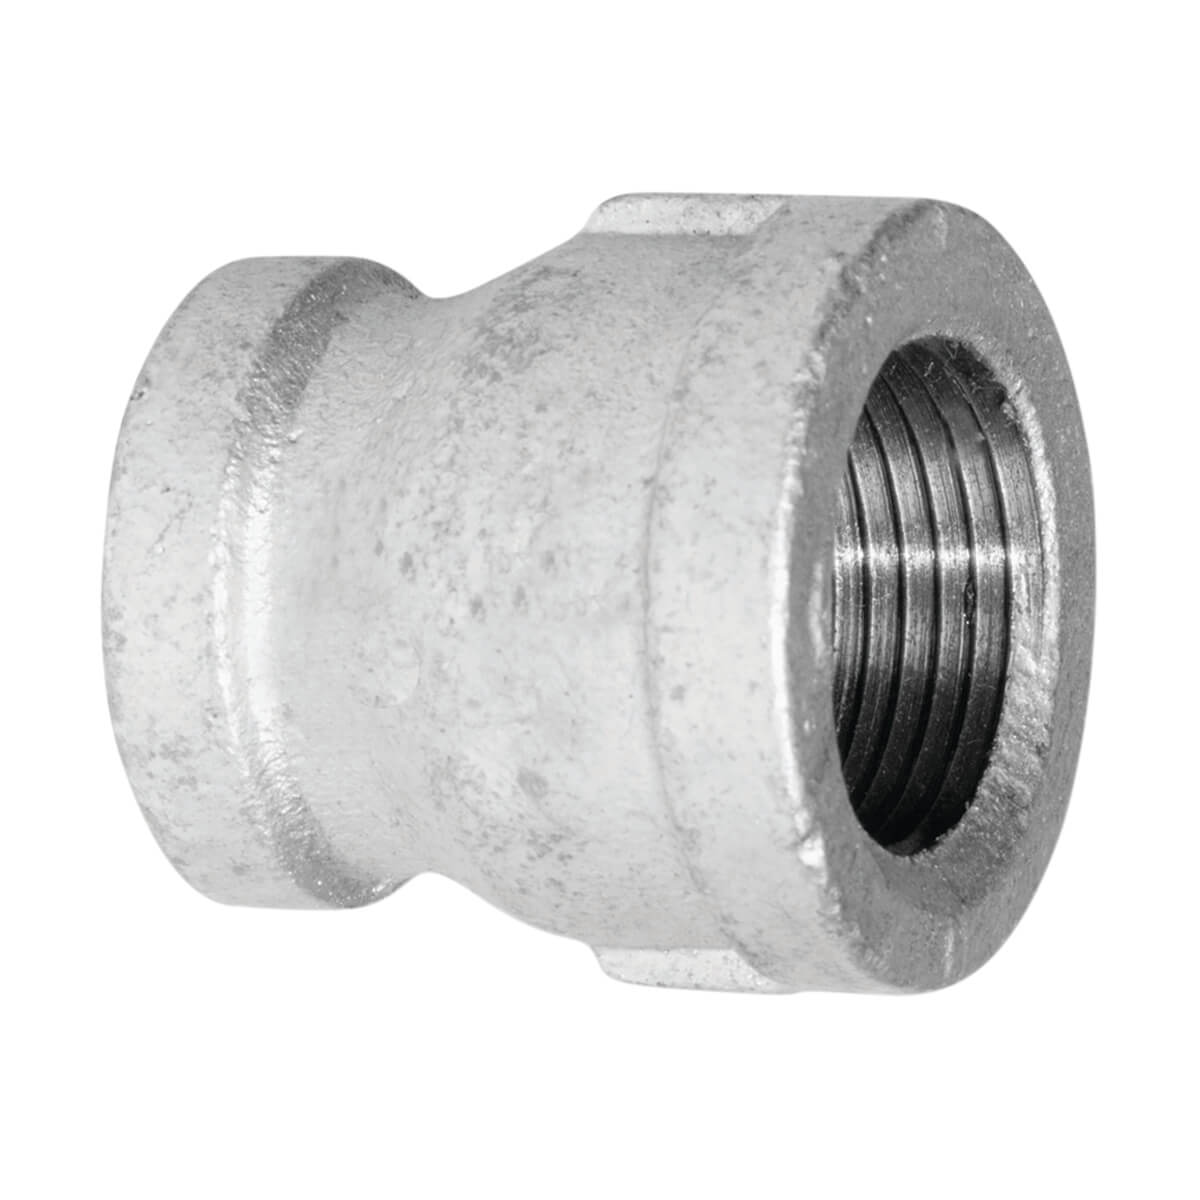 Fitting Galvanized Iron Coupling - 1-1/4-in x 1/2-in